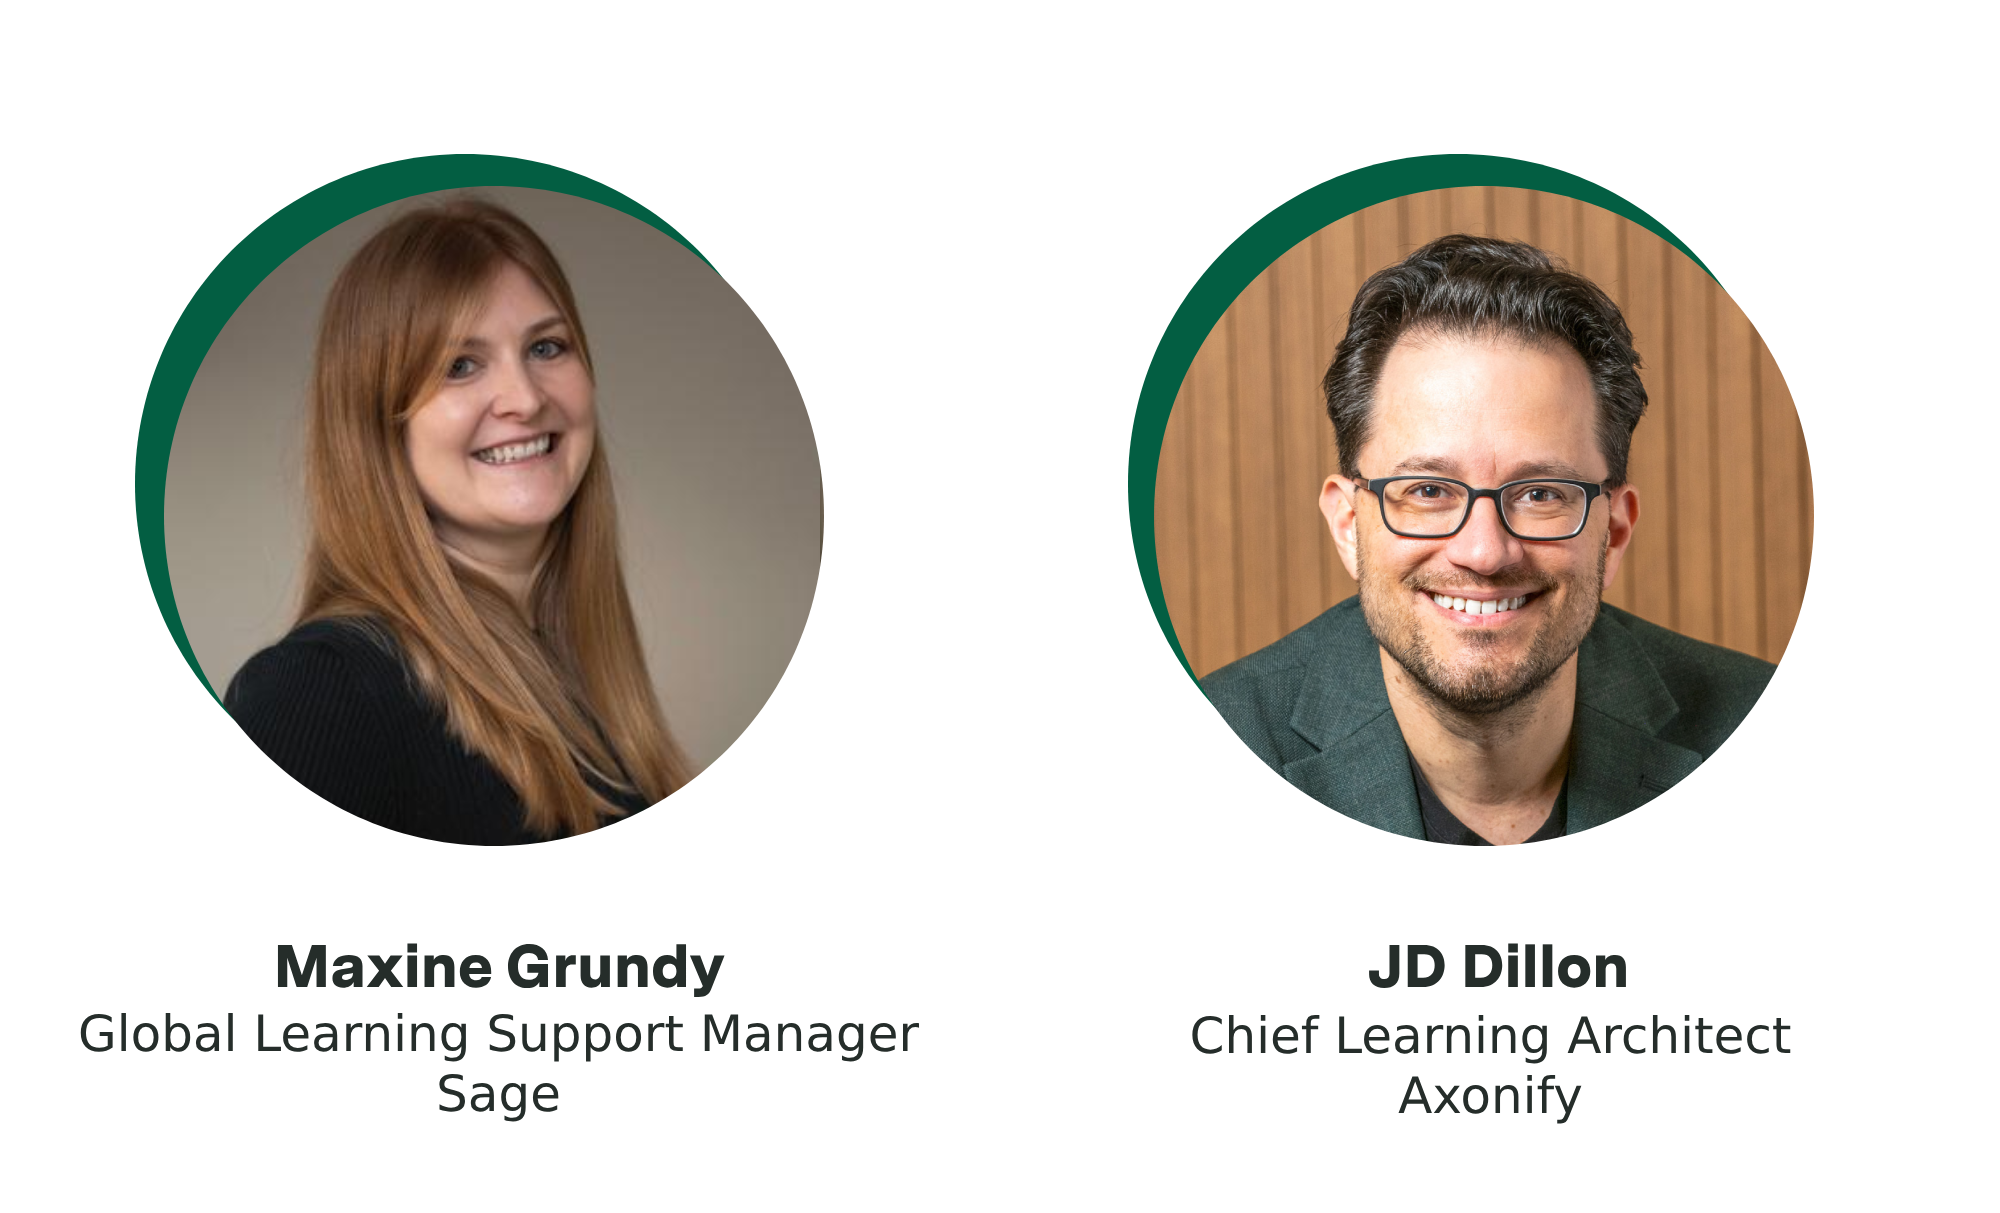 Maxine Grundy, Global Learning Support Manager, Sage and JD Dillon, Chief Learning Architect, Axonify